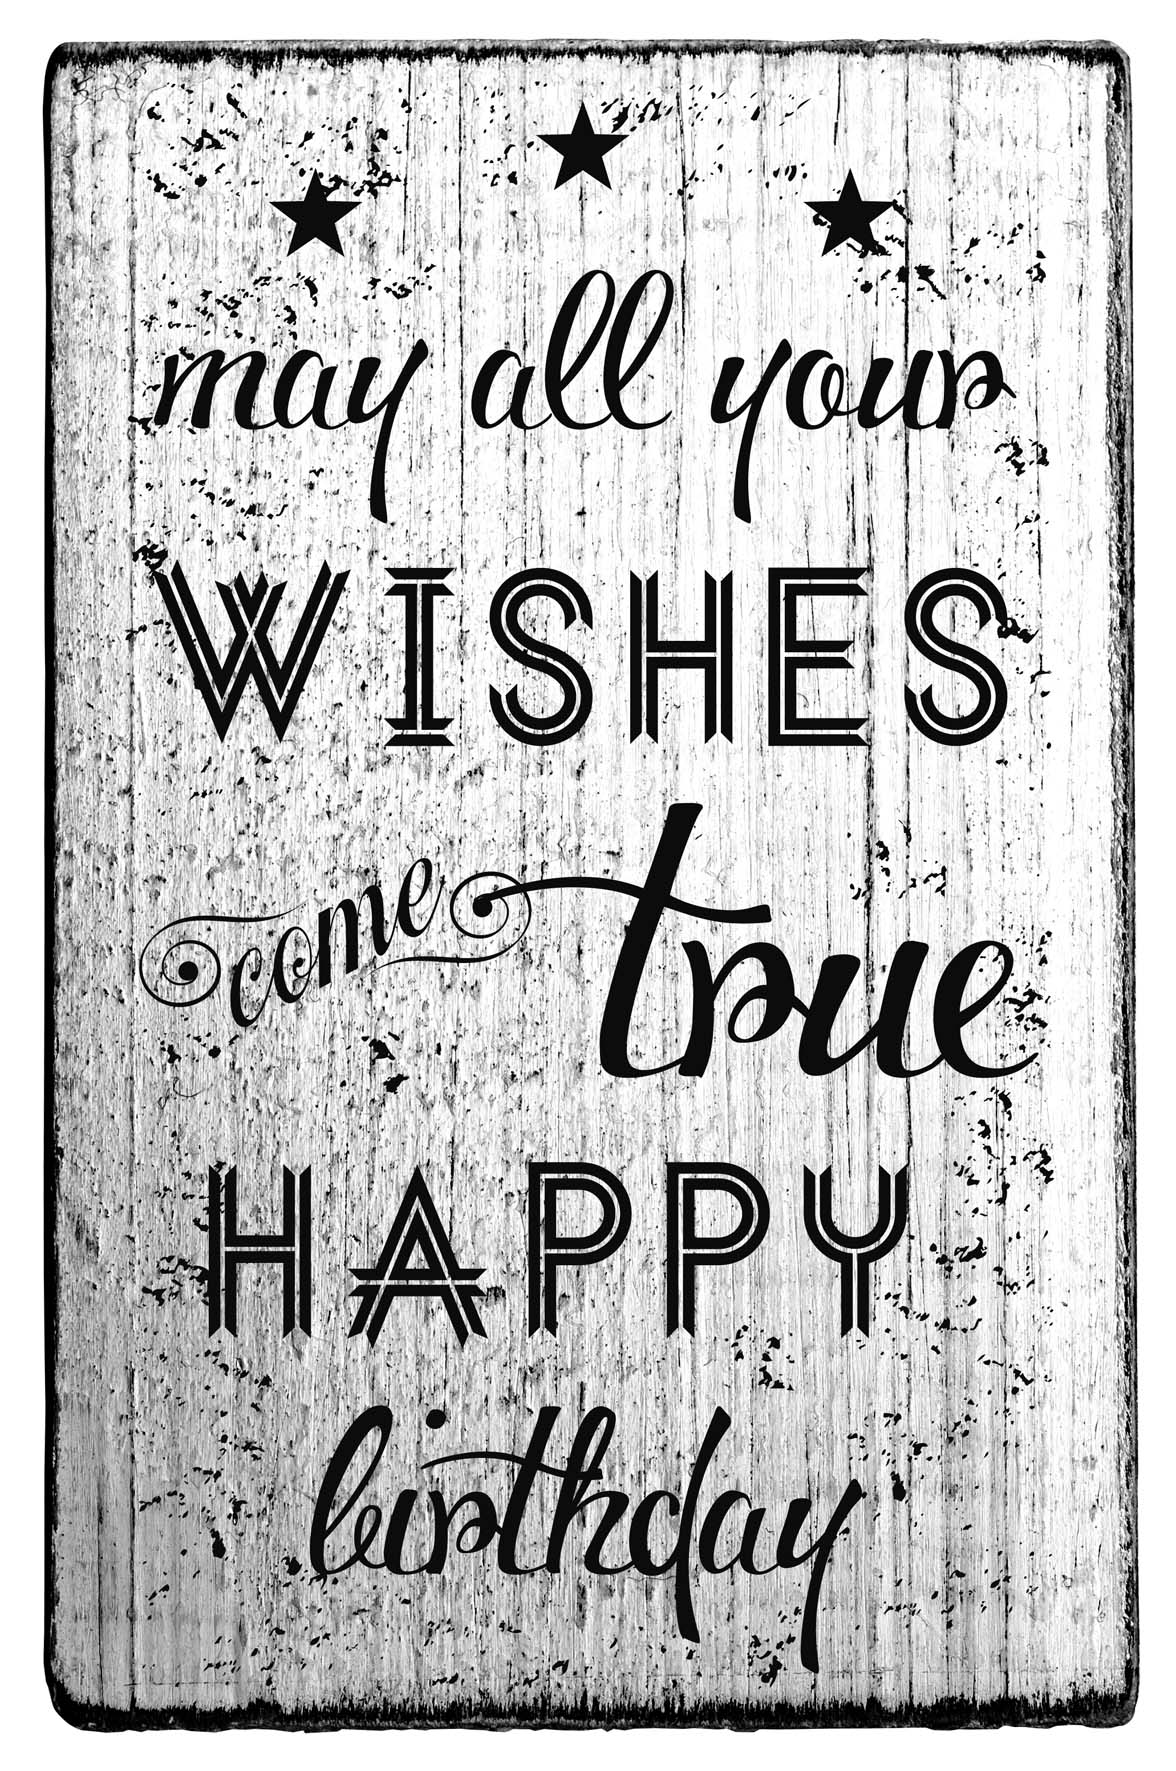 Vintage - may all your wishes come true - V-01040